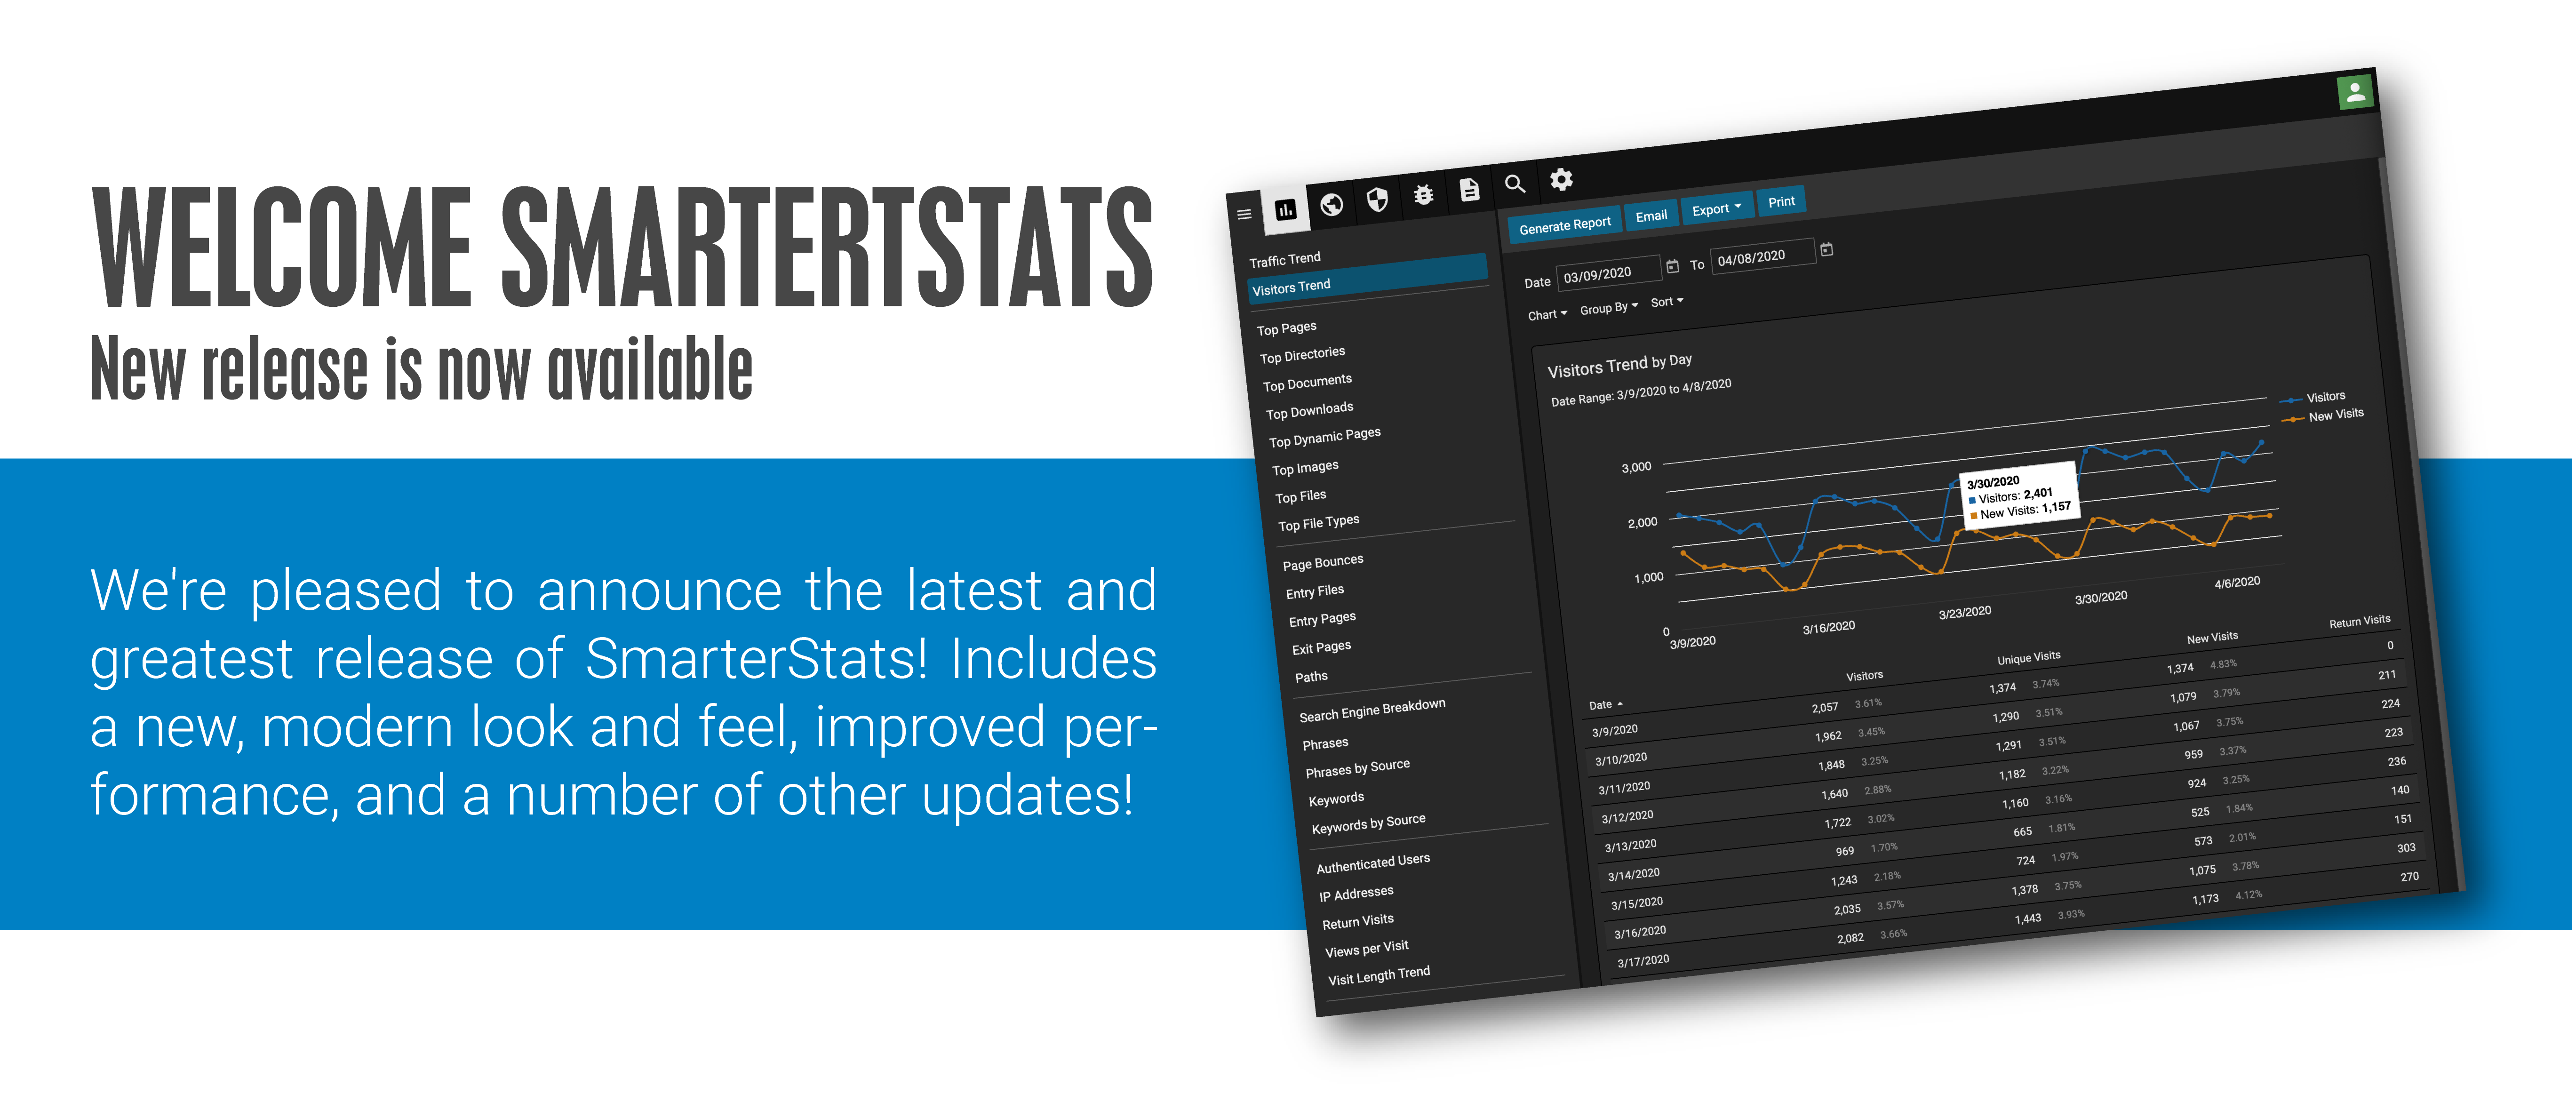 Welcome the New SmarterStats